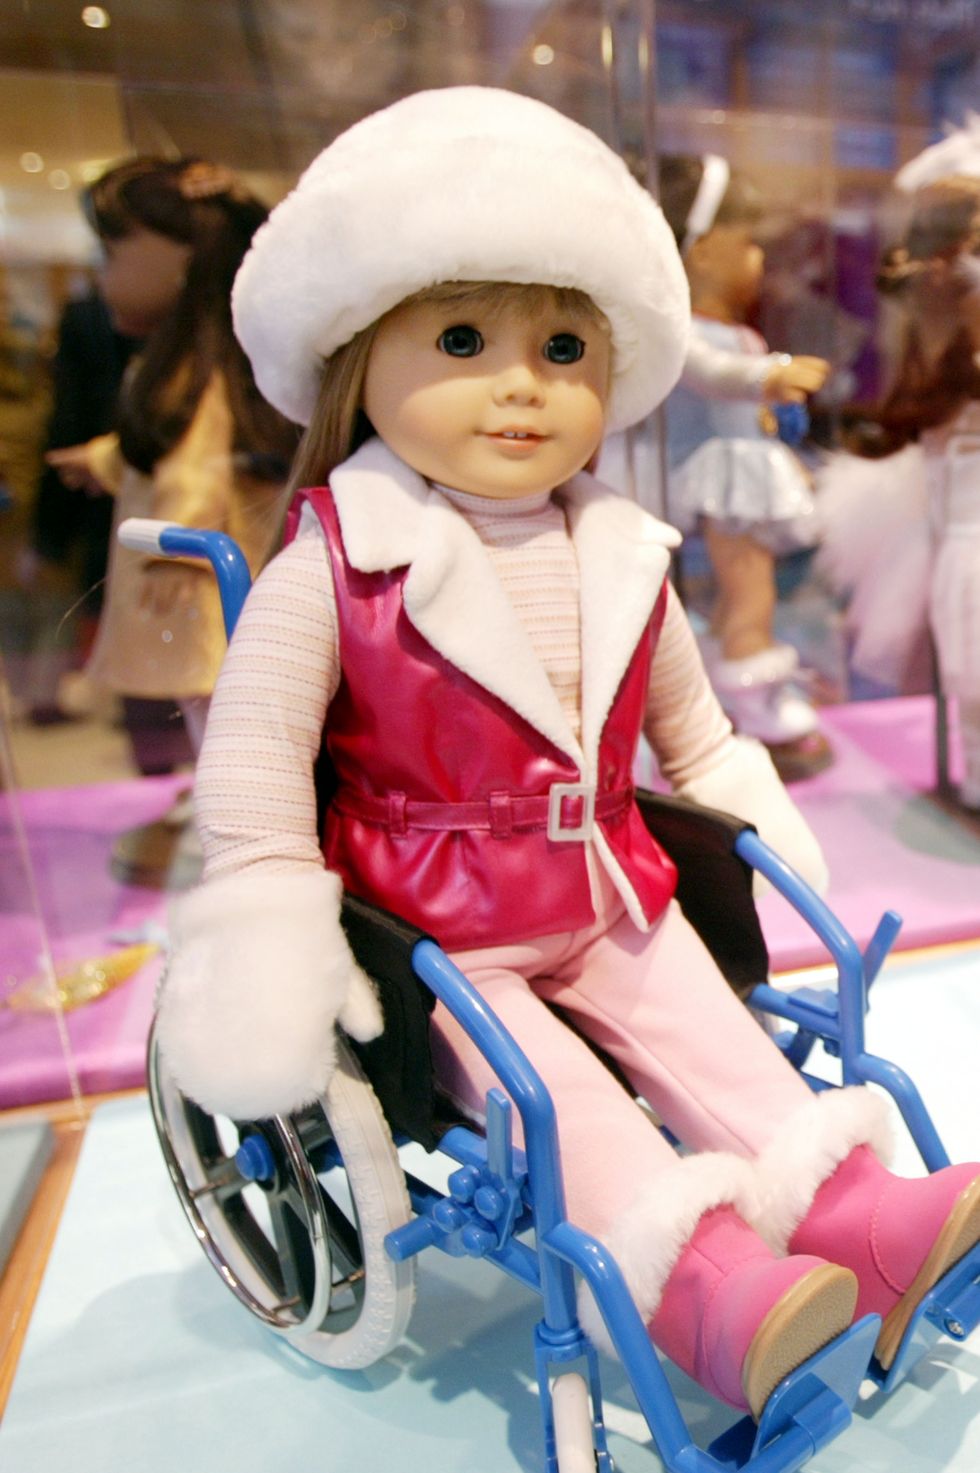 Hospital Stay, 18-inch Doll Outfit